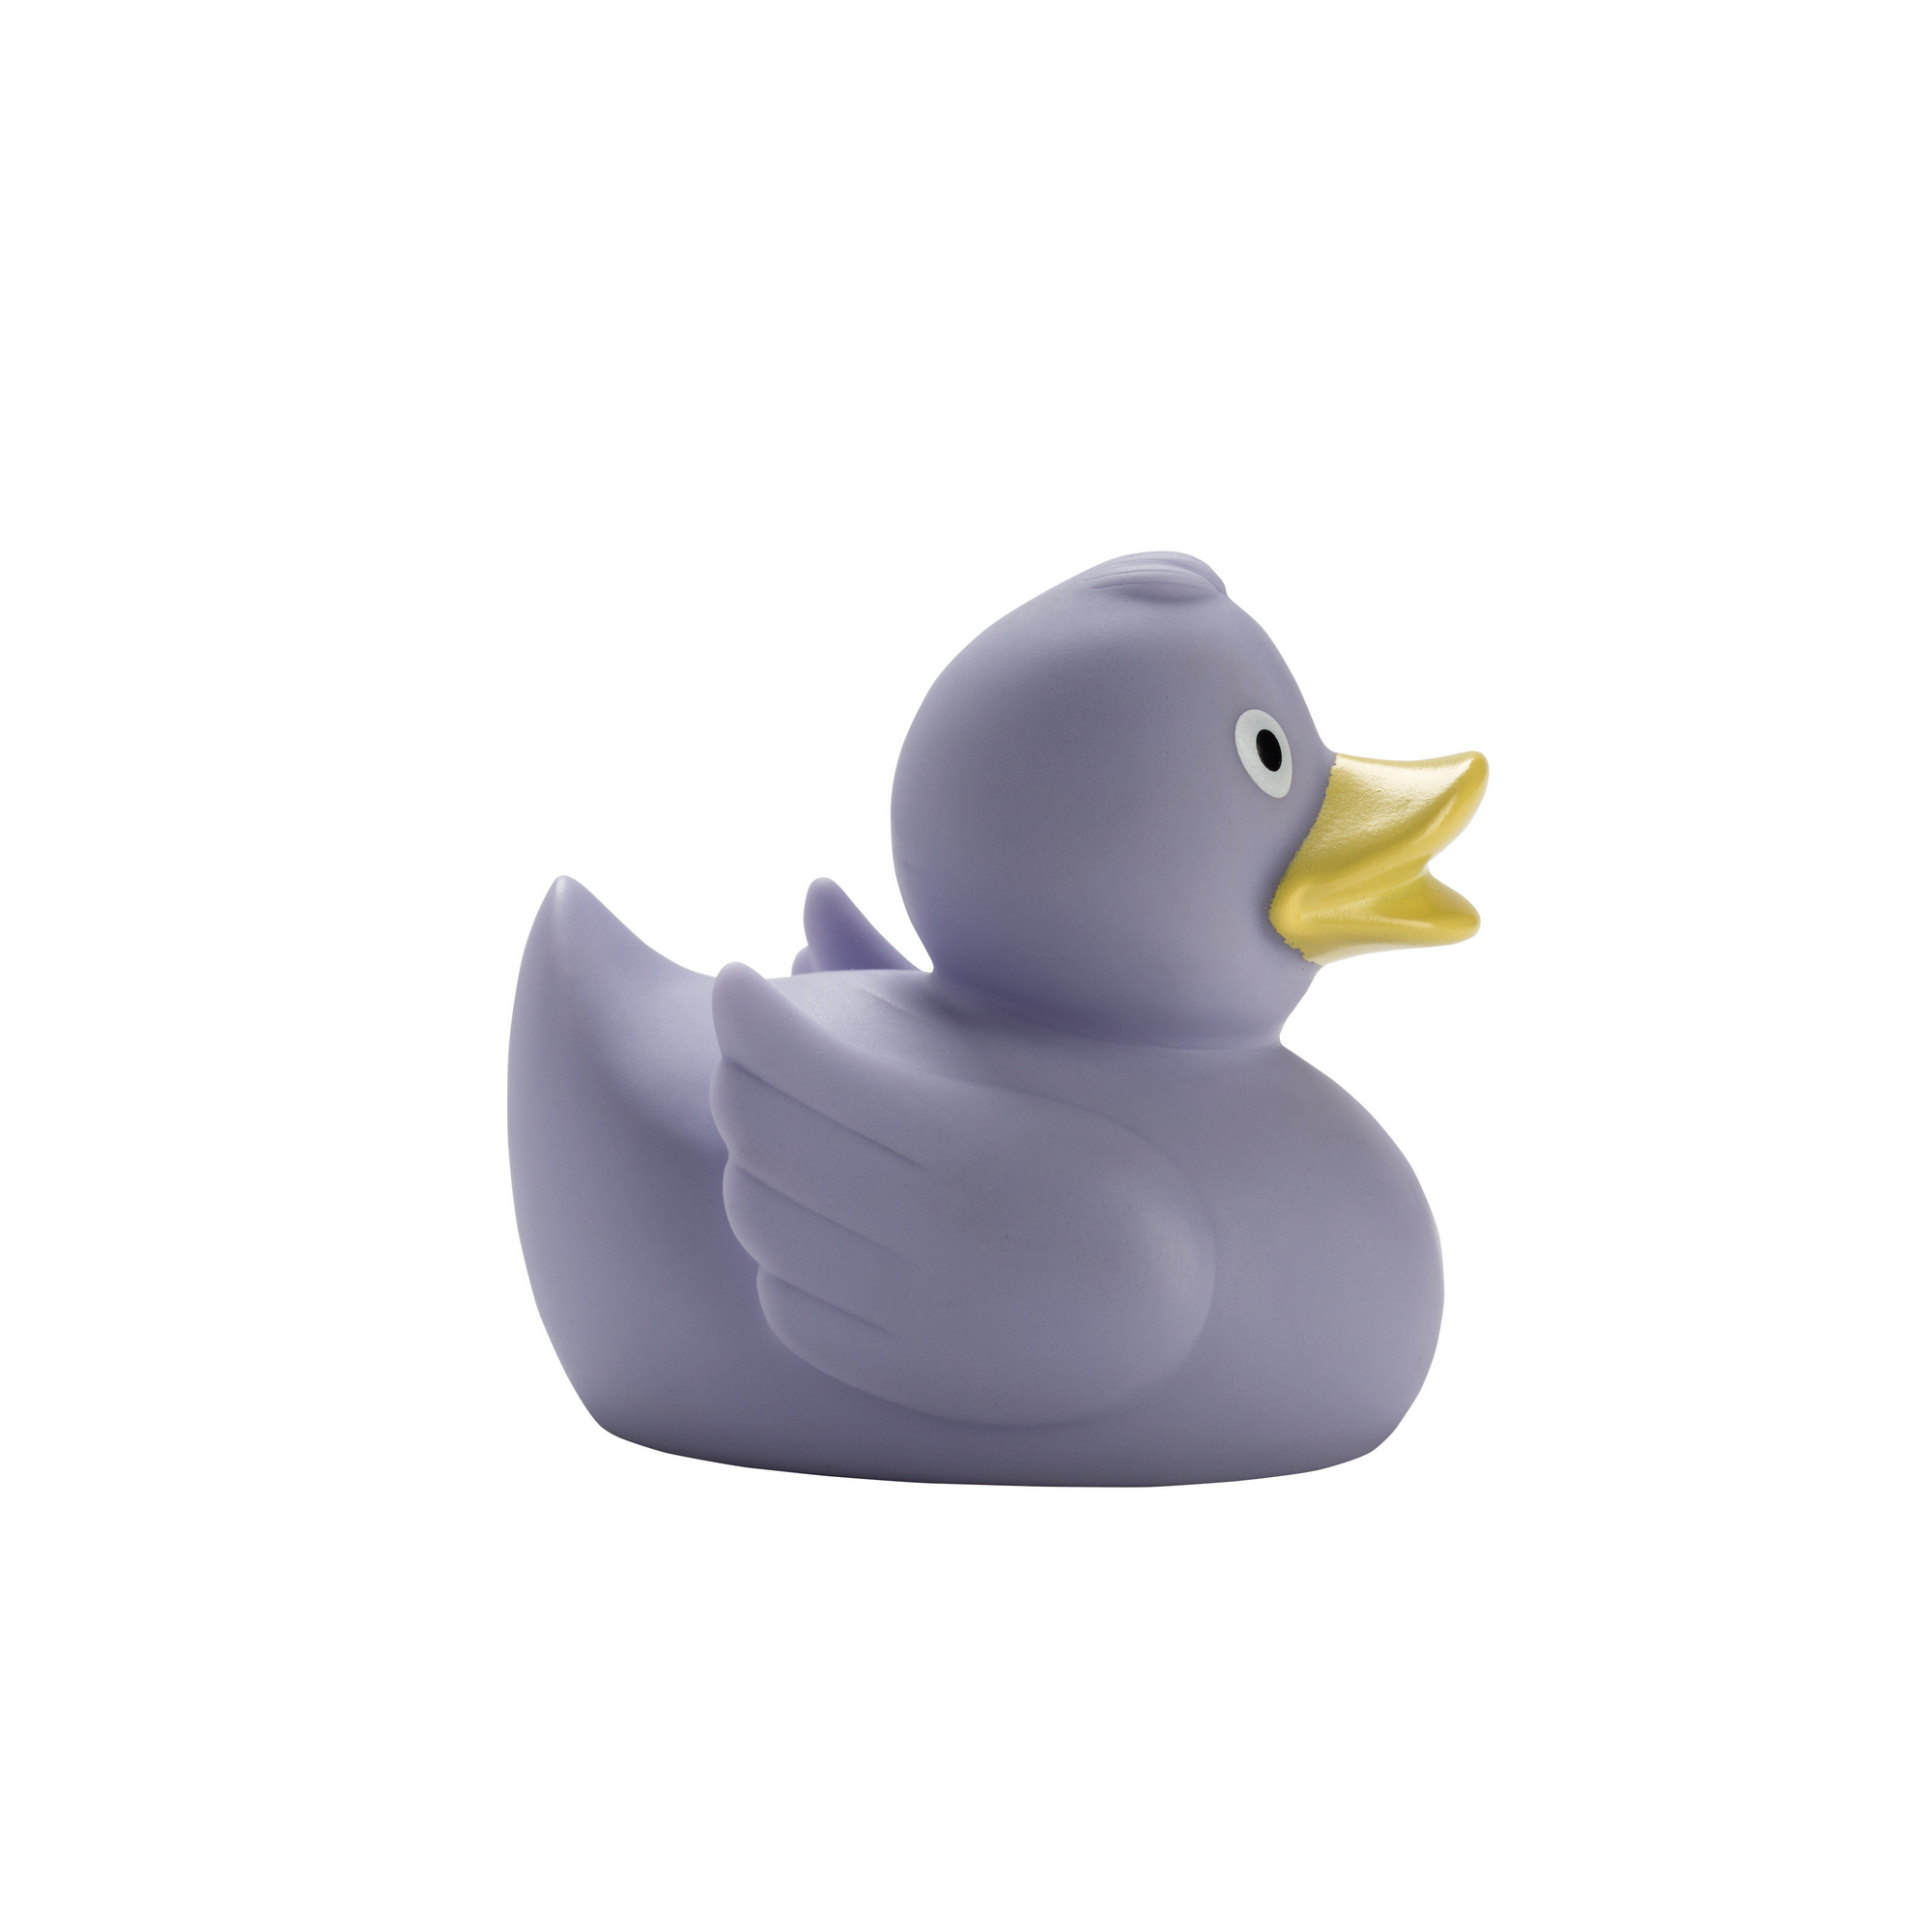 Badeente 'Nanni' Crocus + product picture